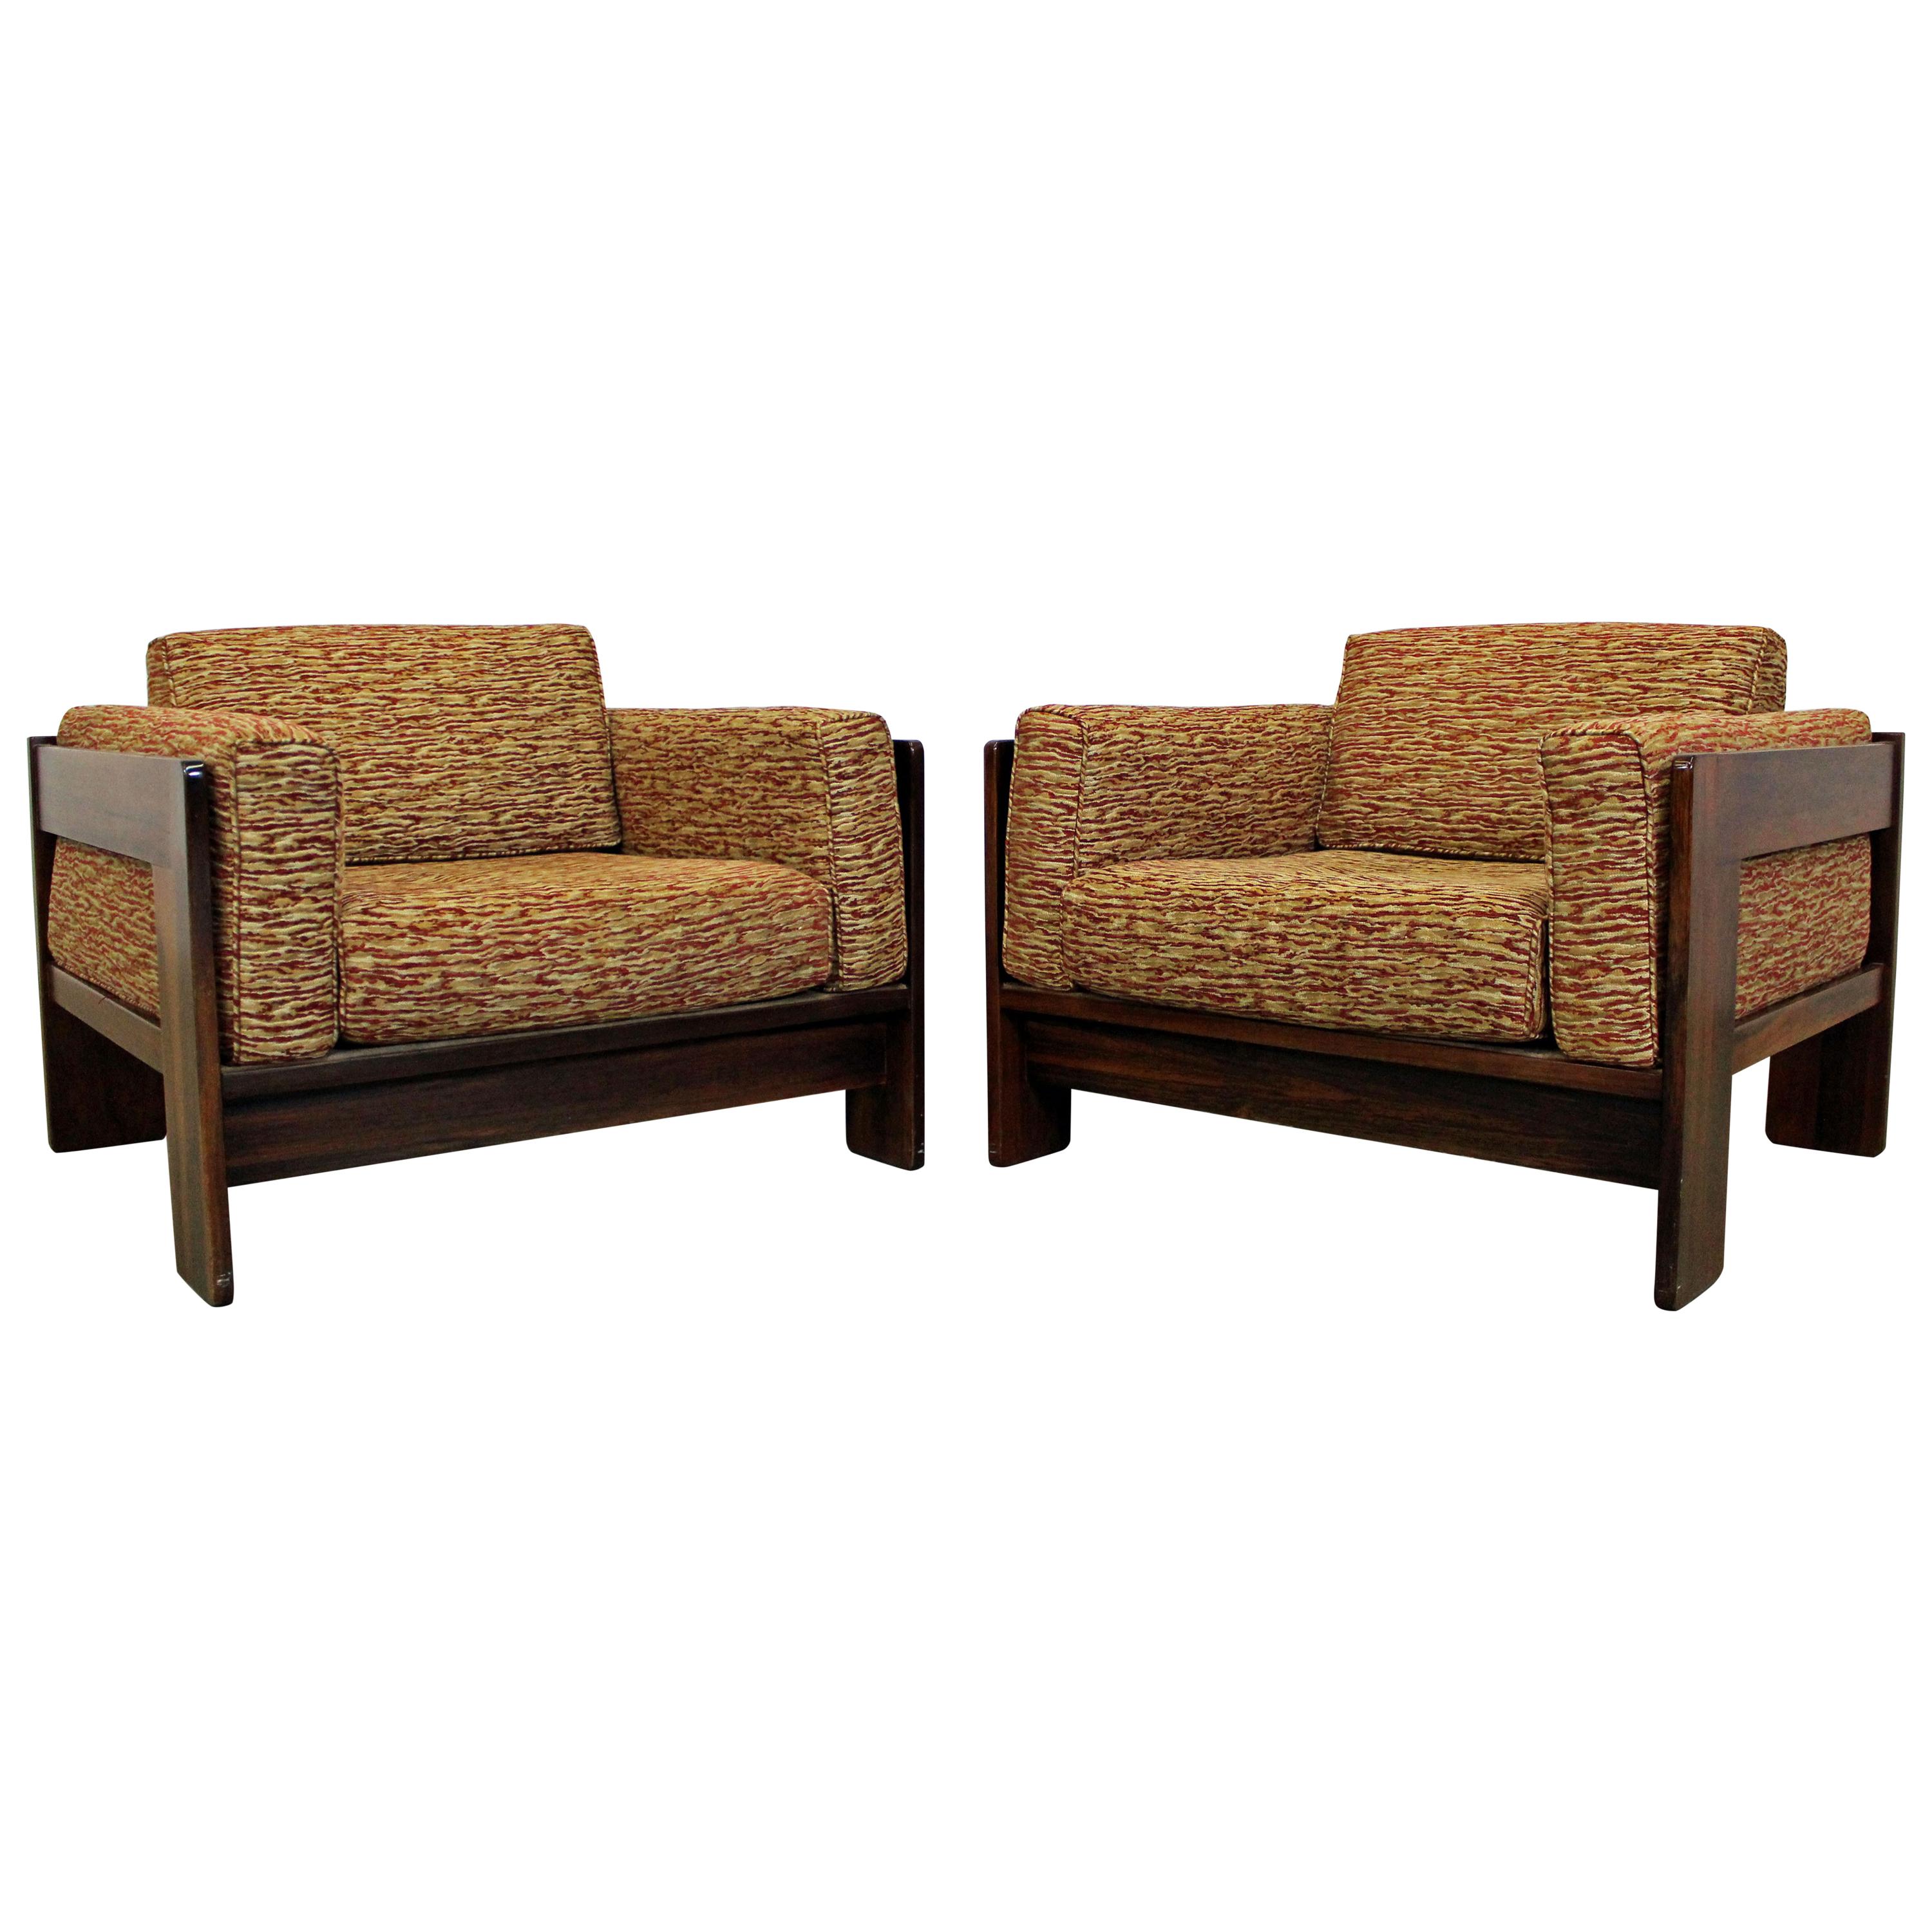 Pair of Mid-Century Modern Bastiano Rosewood Knoll Club Chairs